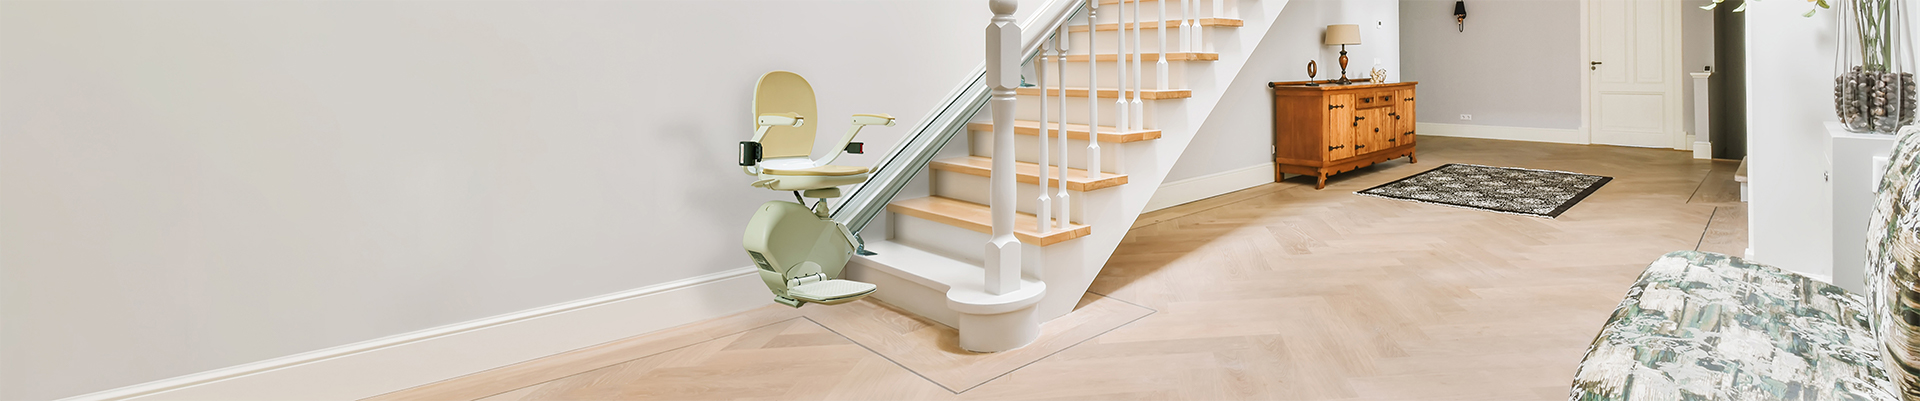 Stairlifts in a Bristol home